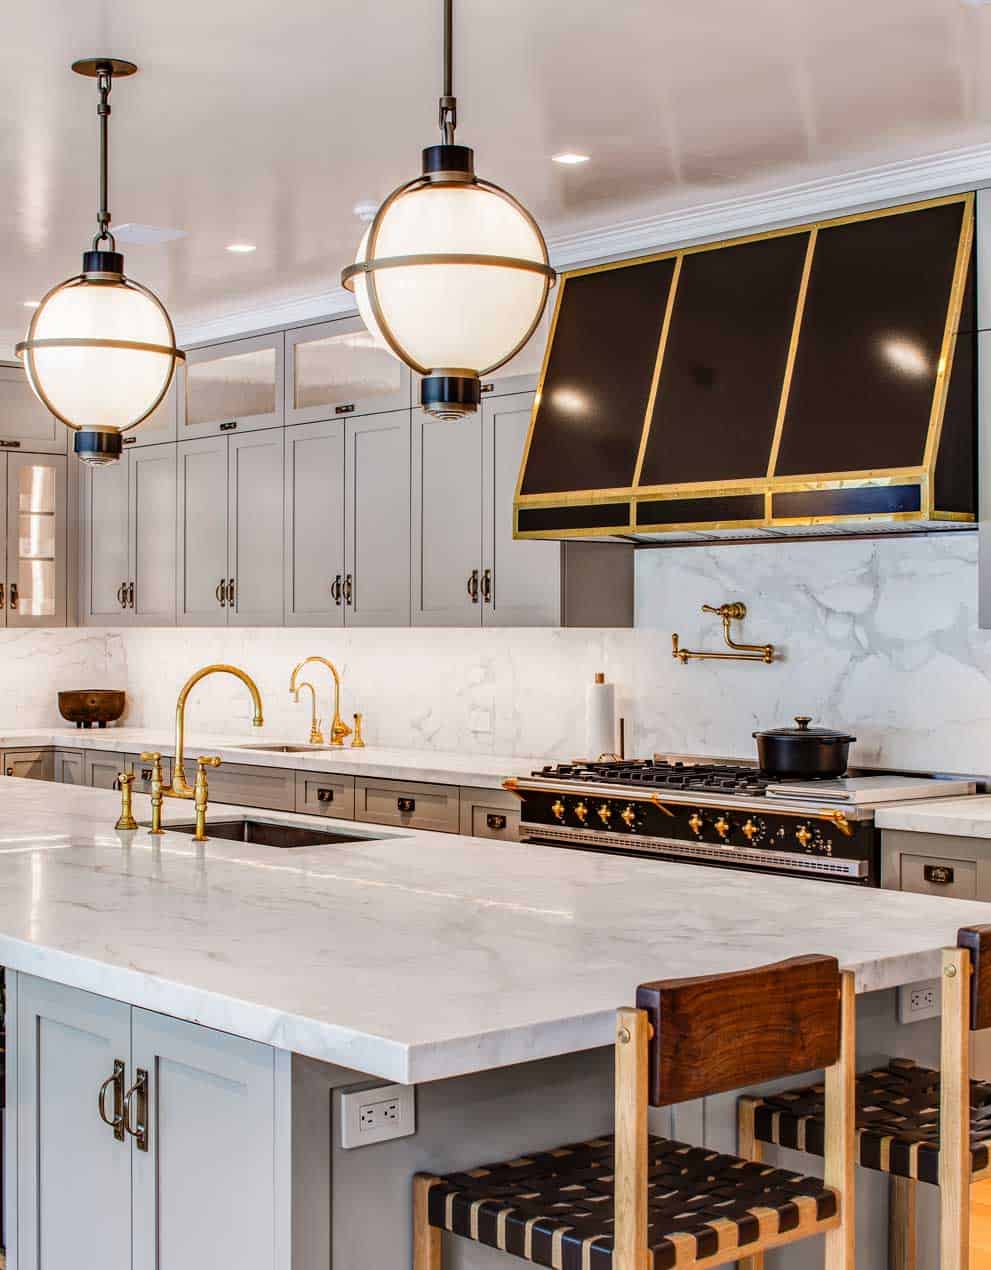 Brass-wrapped globe pendants light the large, marble topped island of a European-inspired kitchen.